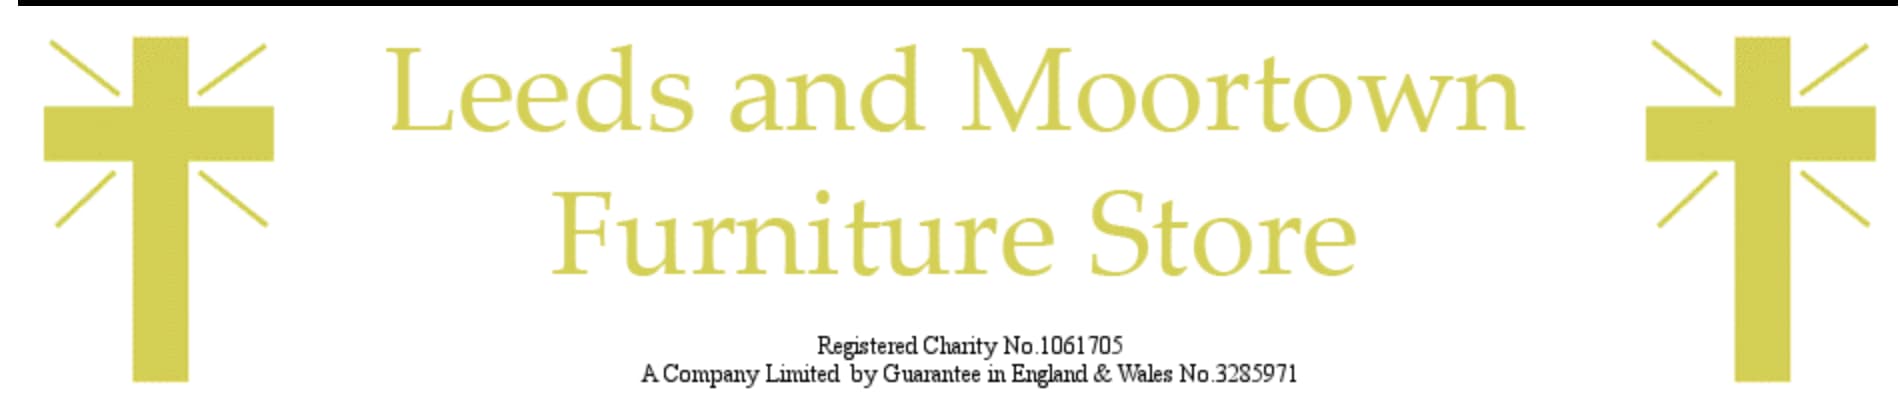 Leeds and Moortown Furniture Charity Shop